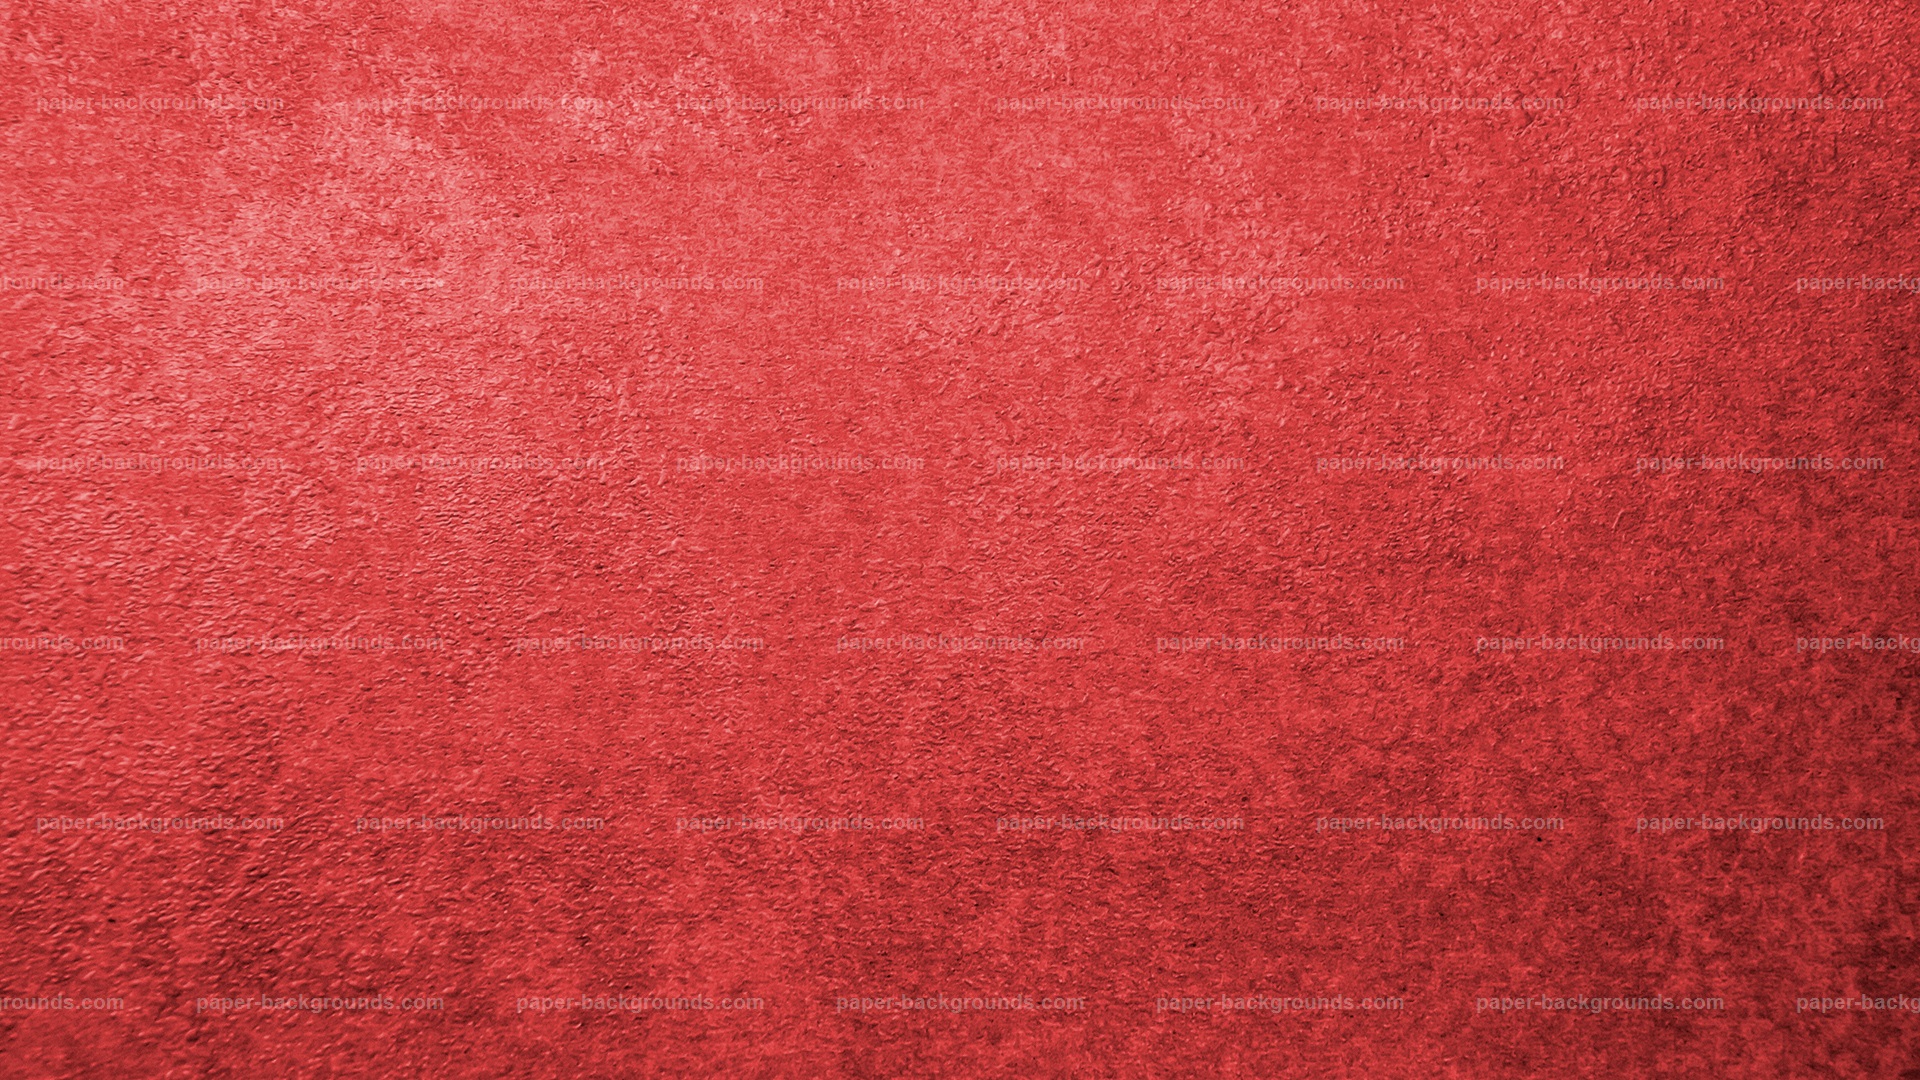 Paper Background Red Wall Texture Vinta Ound